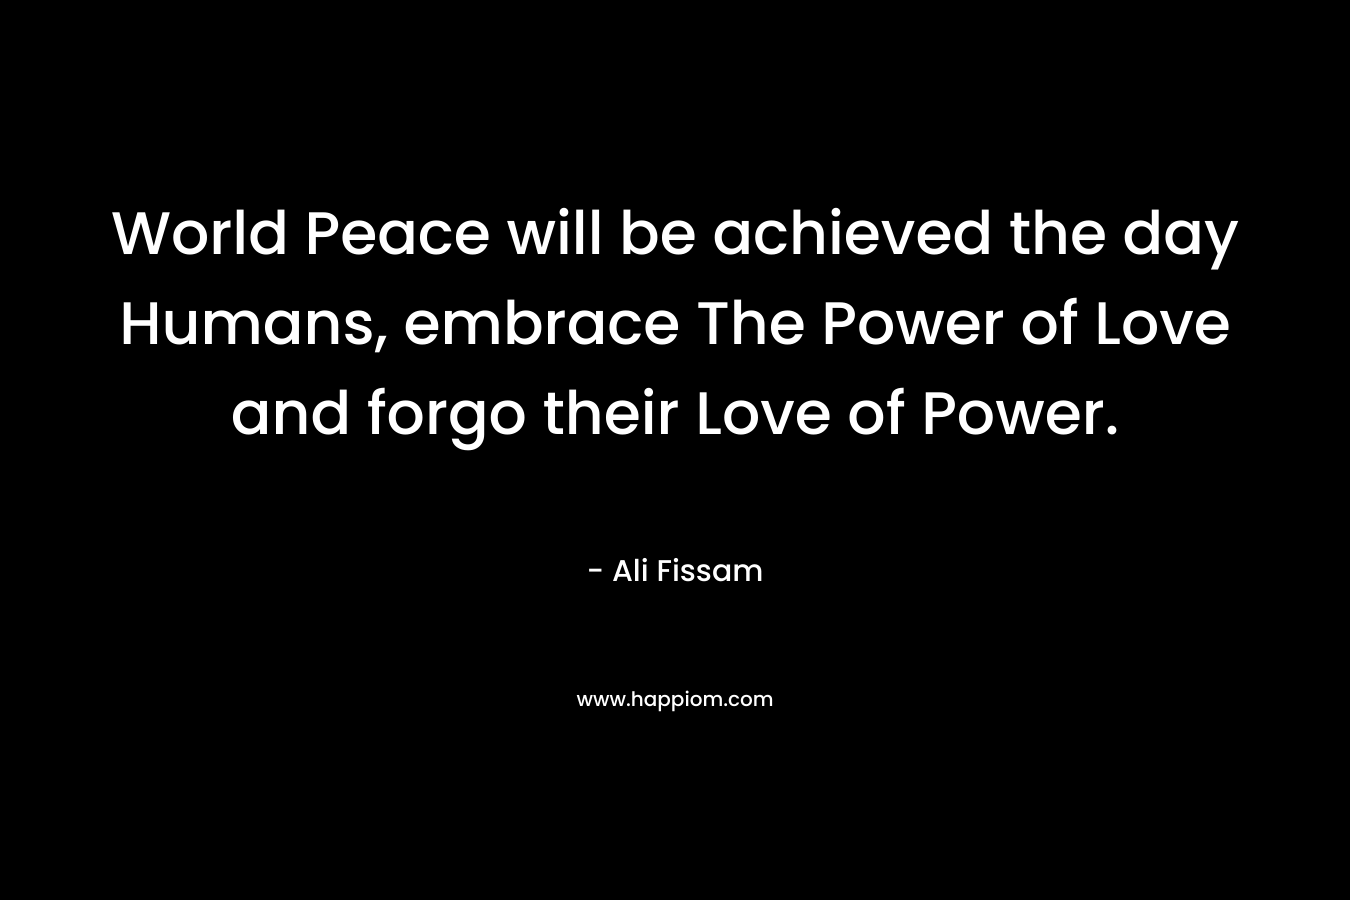 World Peace will be achieved the day Humans, embrace The Power of Love and forgo their Love of Power.